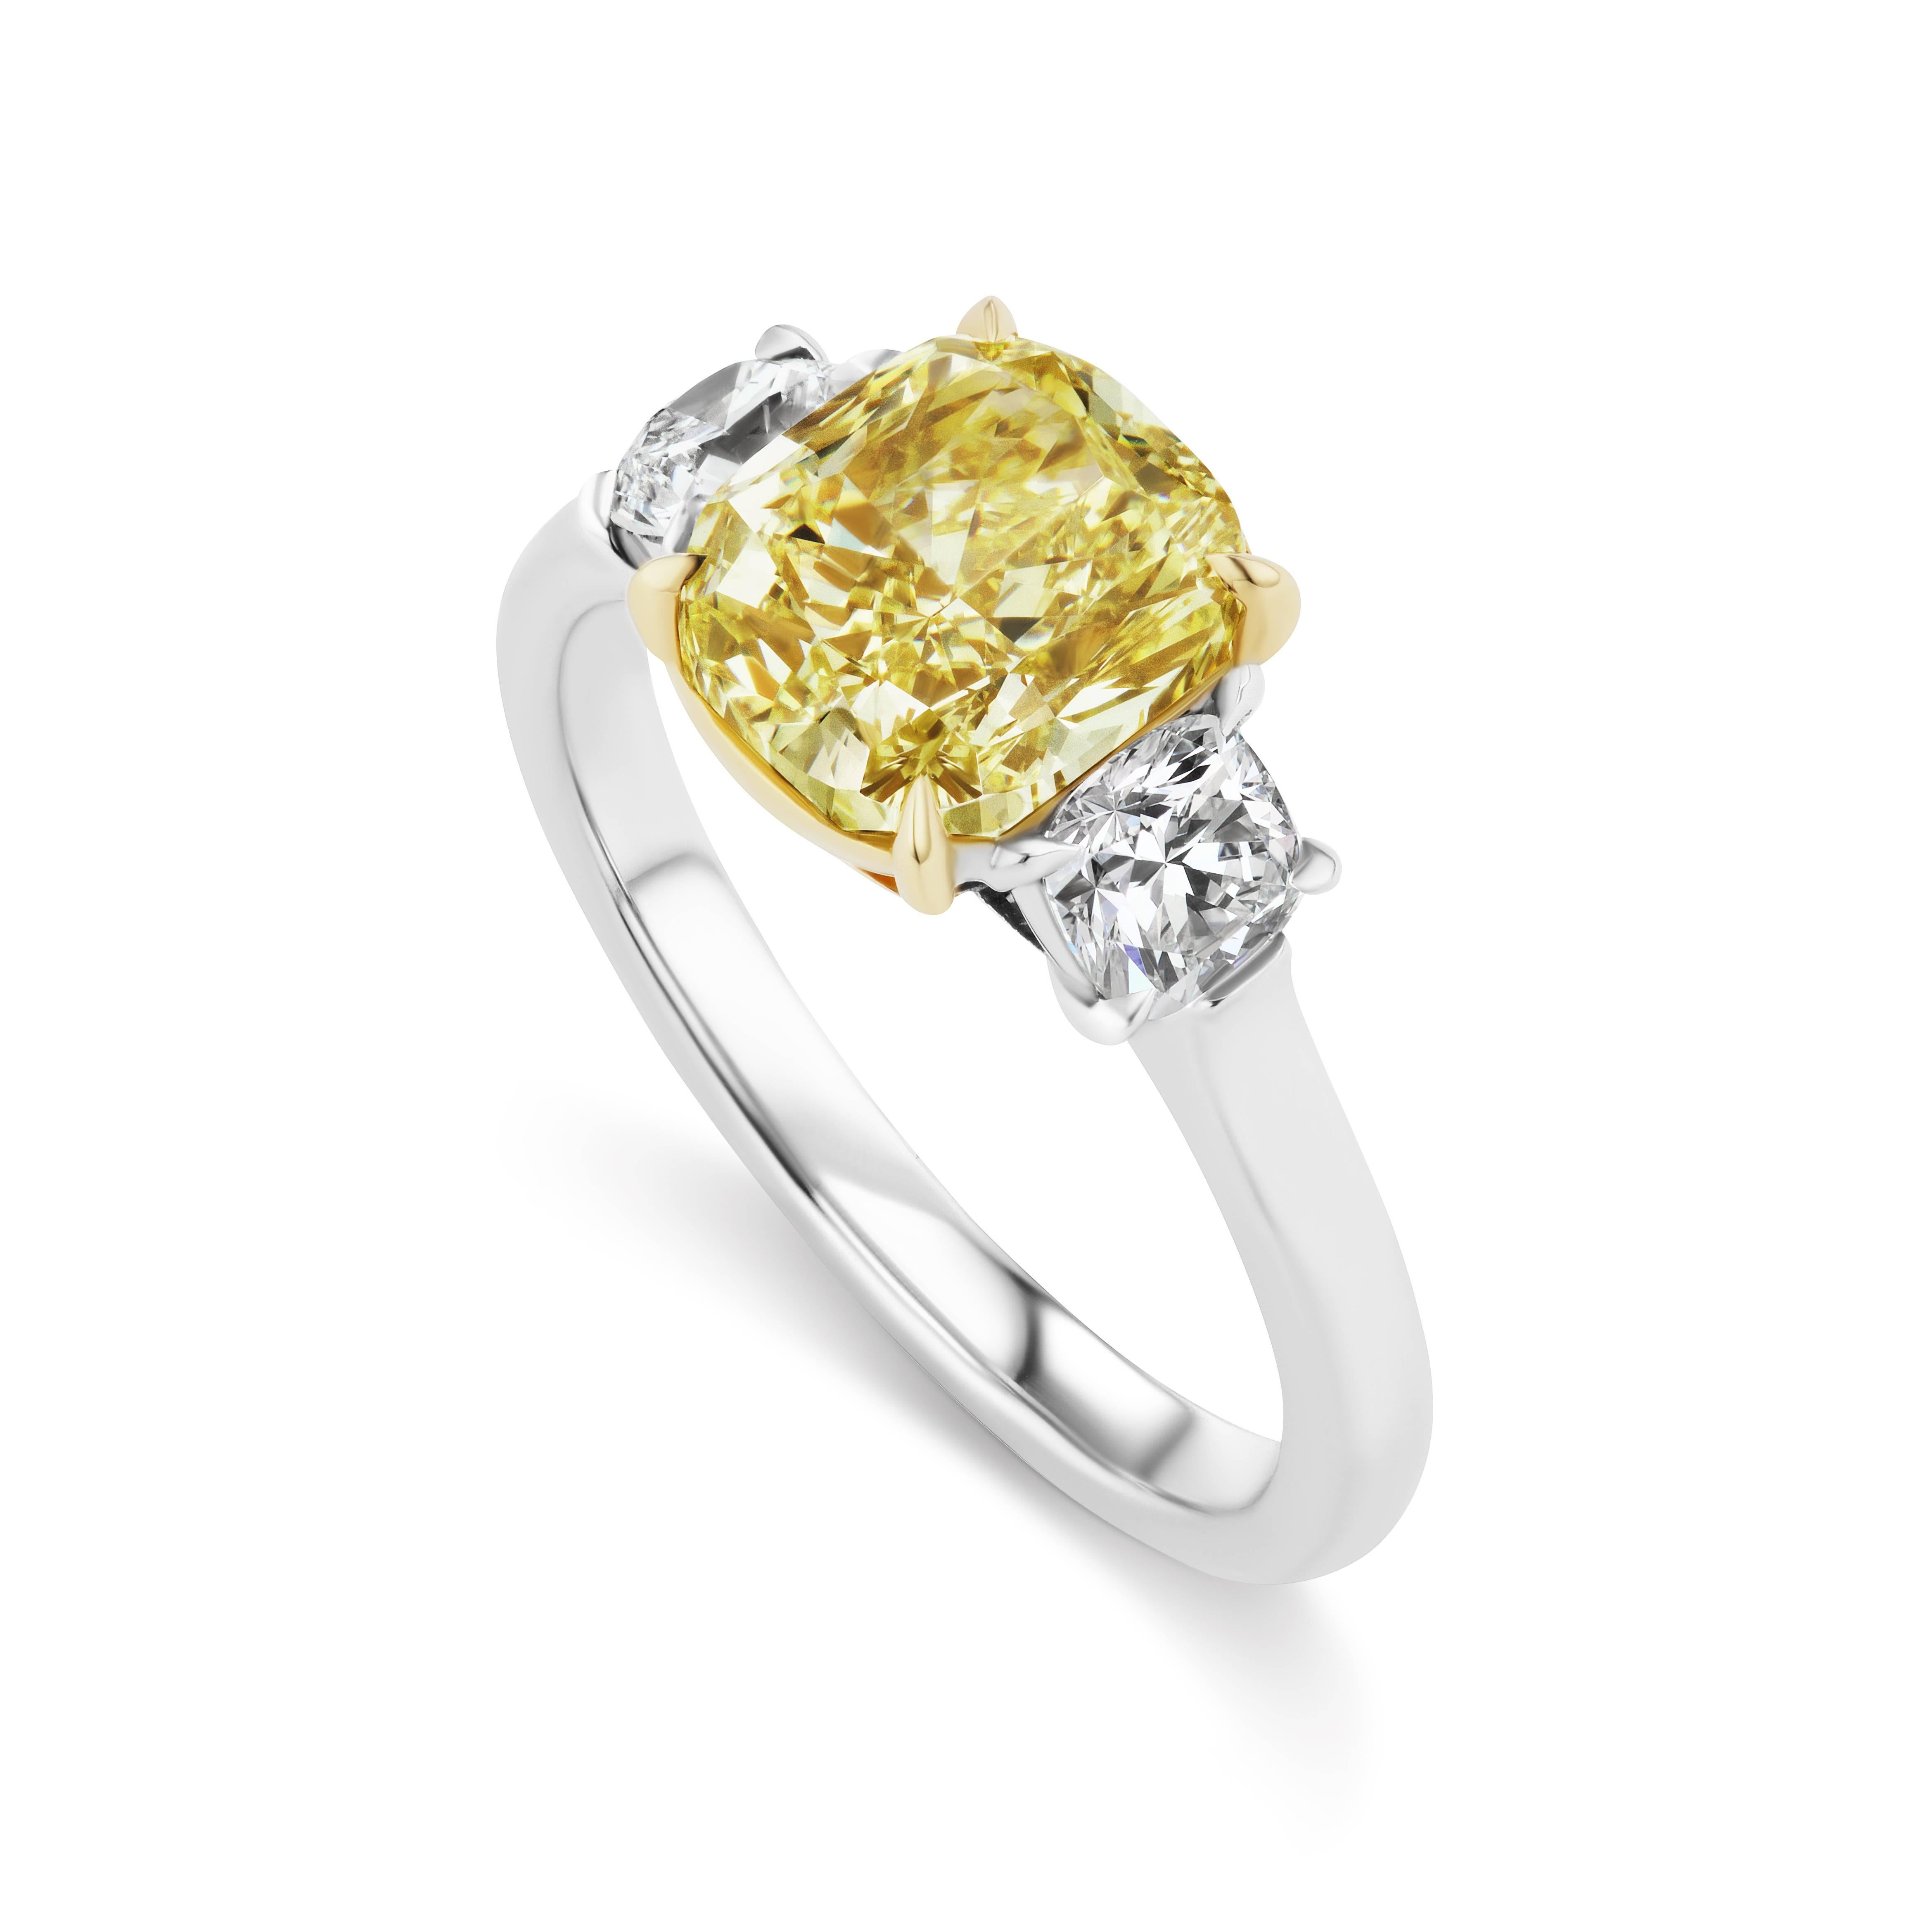 This Scarselli Classics  2.52 carat Fancy Yellow VS1 Cushion Cut diamond is flanked by a pair of white cushion cut diamonds that total .58 carats.  The diamonds are mounted in Platinum with 18 karat yellow gold.  This ring from the Scarselli Classic